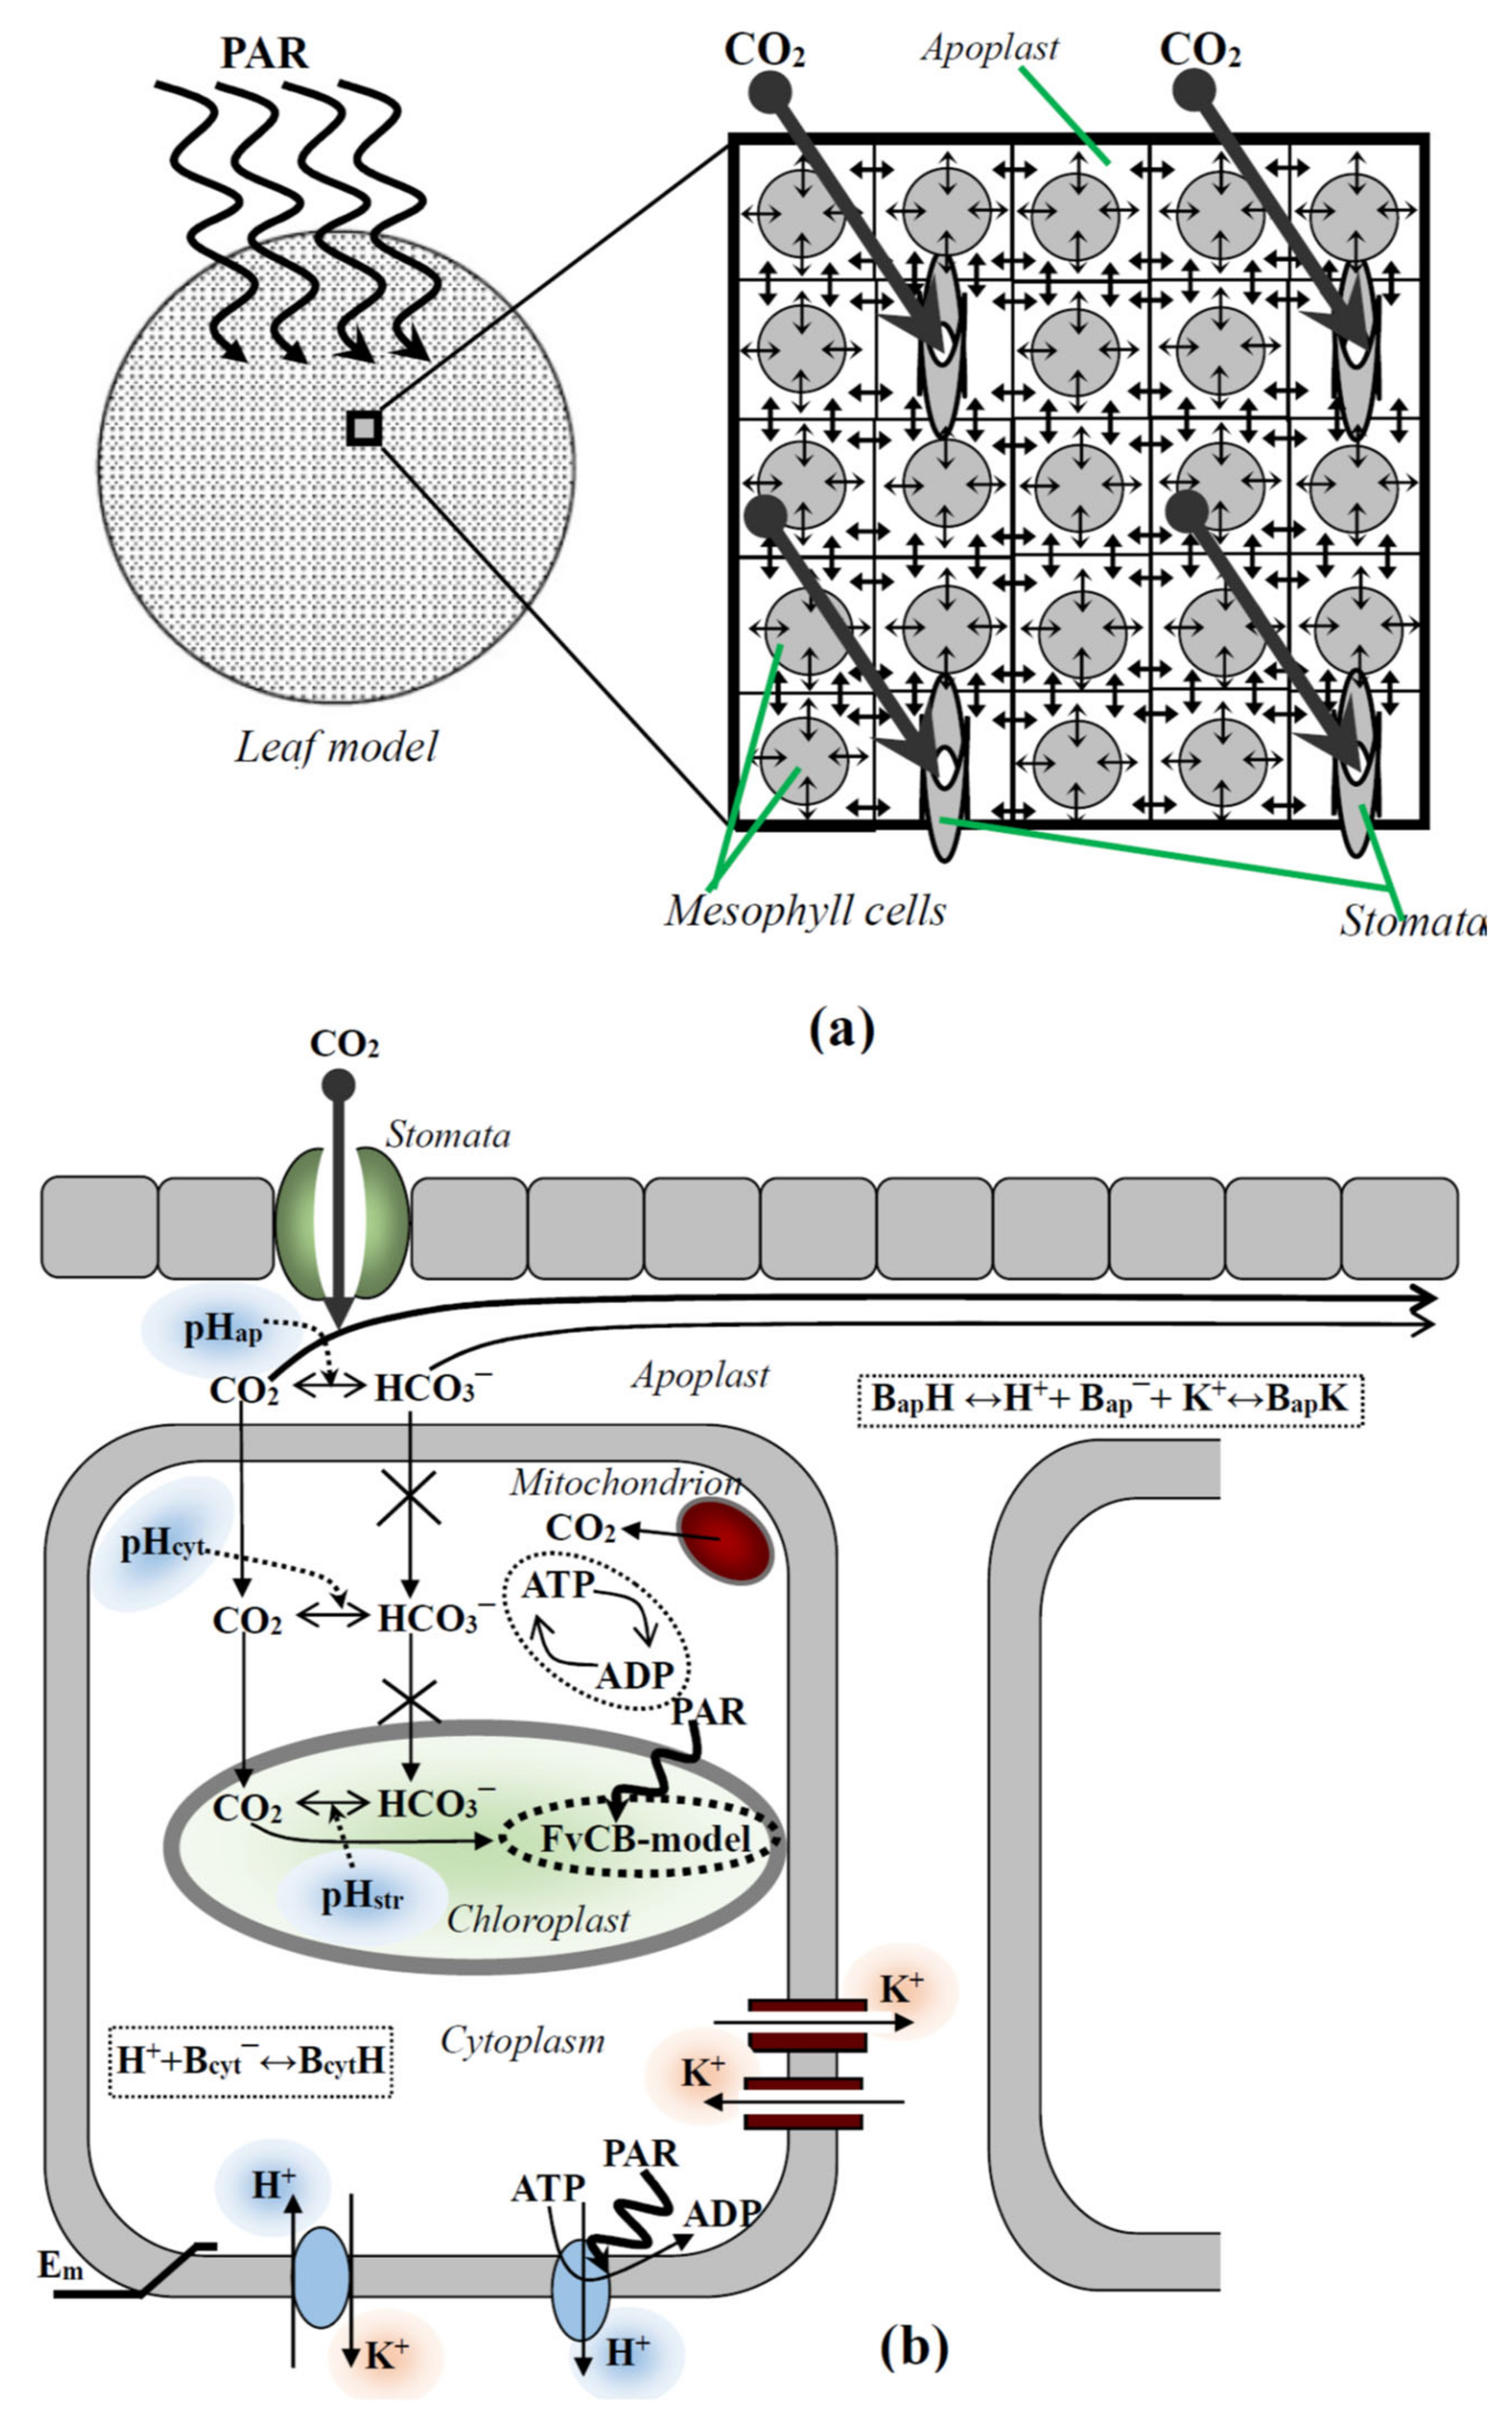 Plants | Free Full-Text | Simulated Analysis of Influence of Changes in  H+-ATPase Activity and Membrane CO2 Conductance on Parameters of  Photosynthetic Assimilation in Leaves